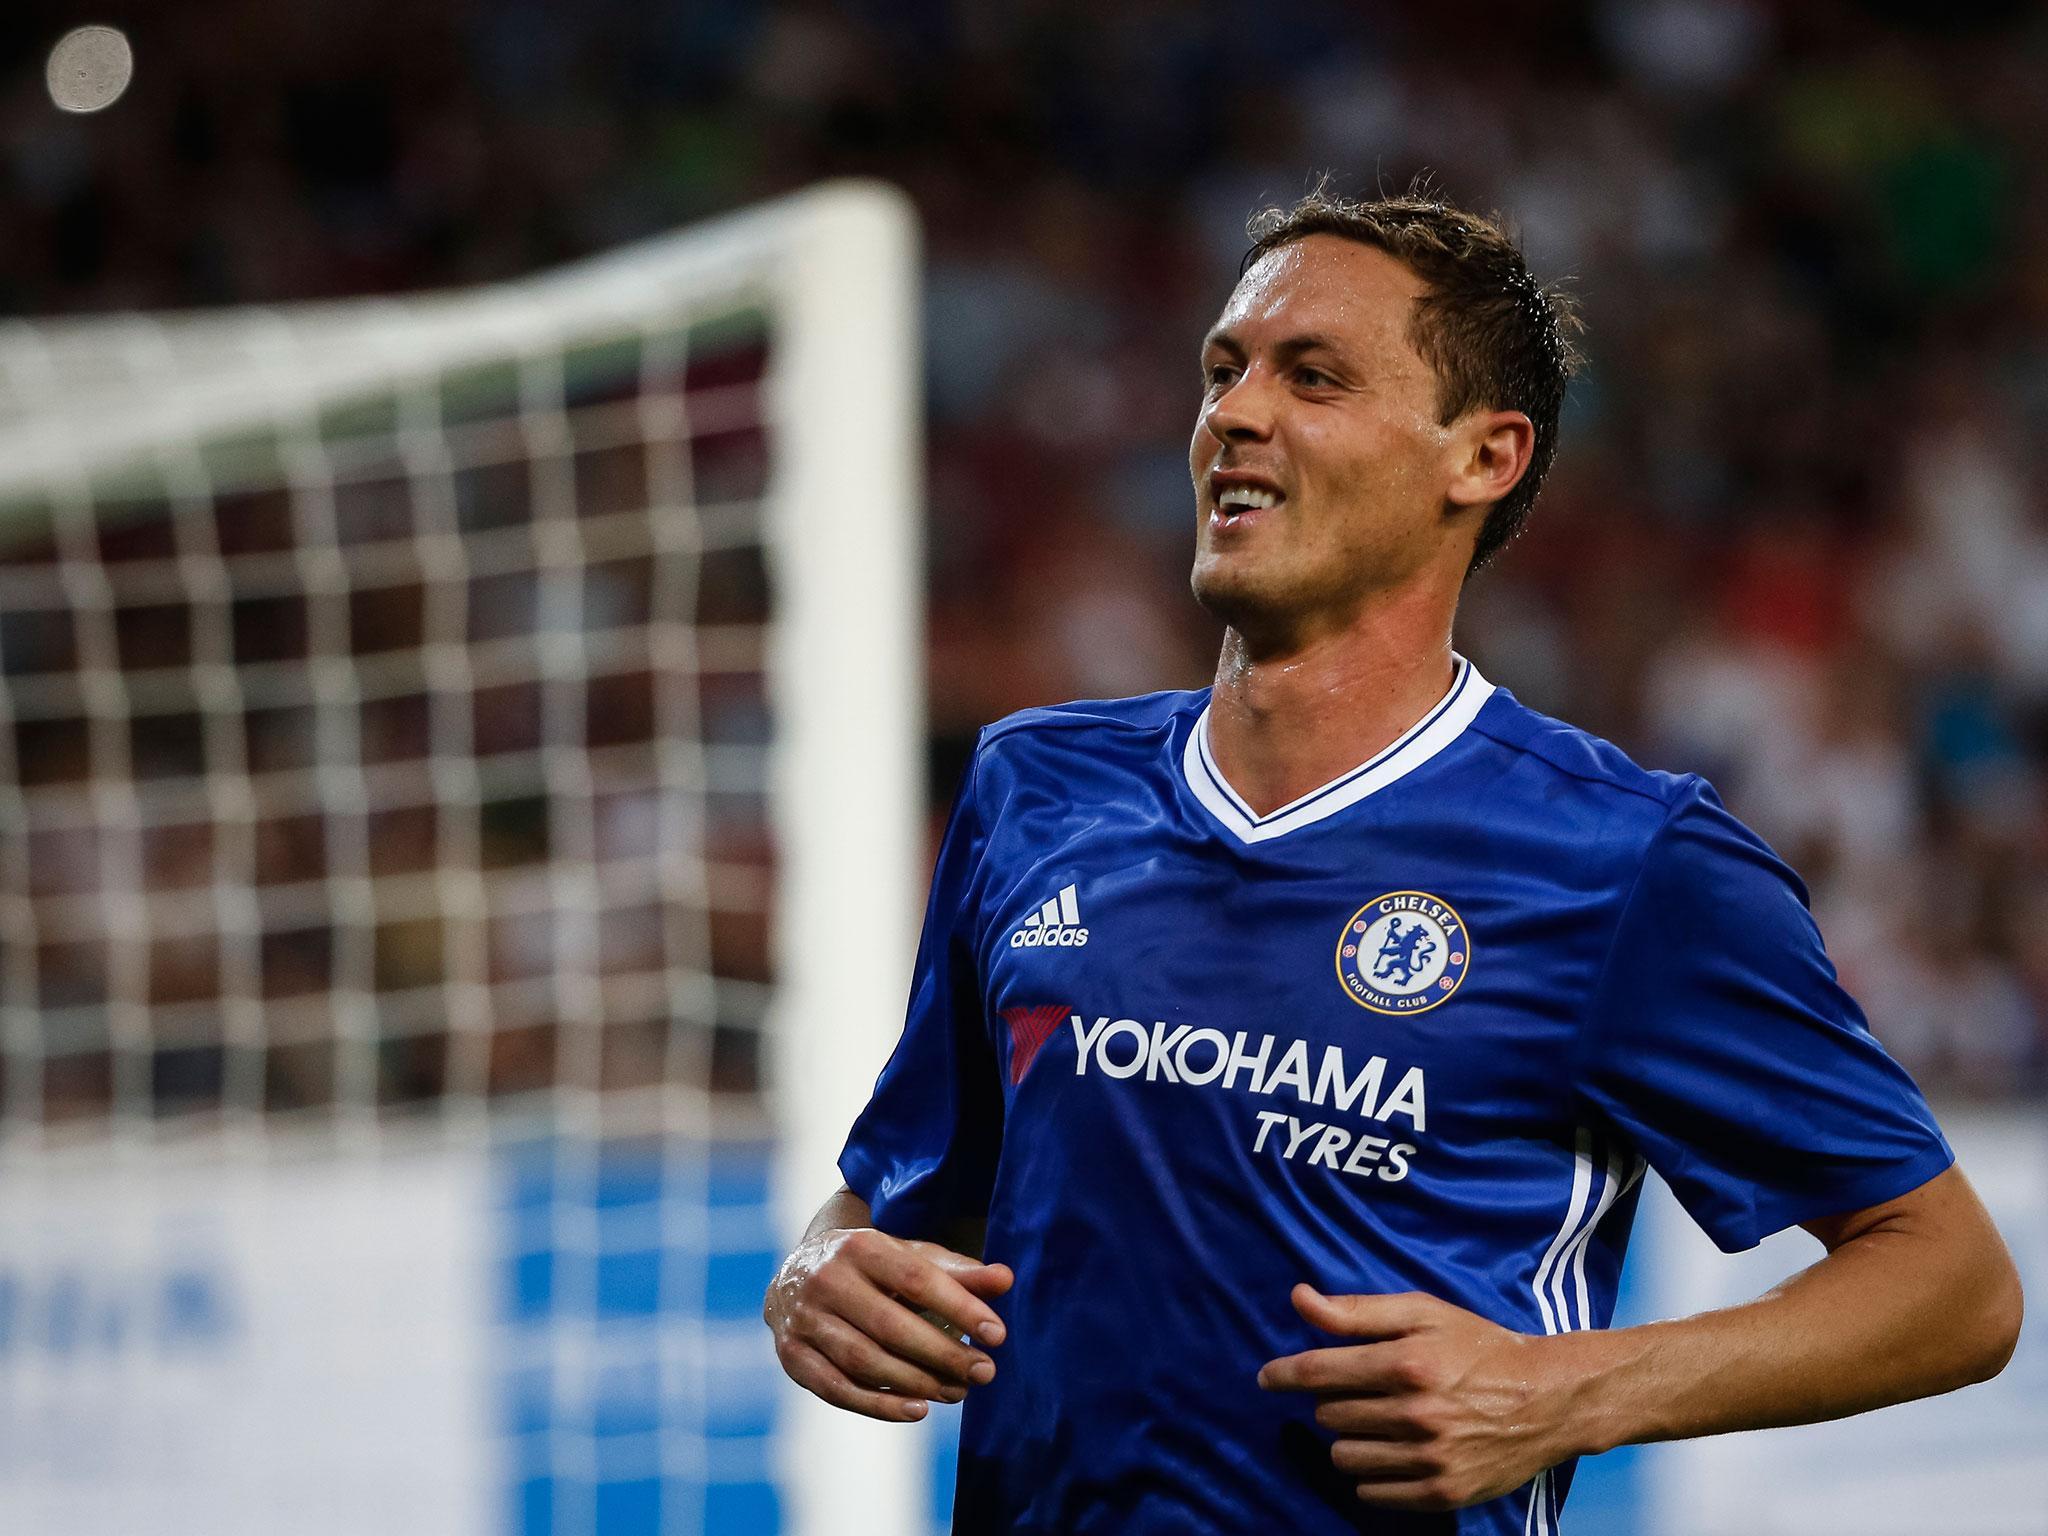 Gary Neville has backed Nemanja Matic to be a success at Manchester United